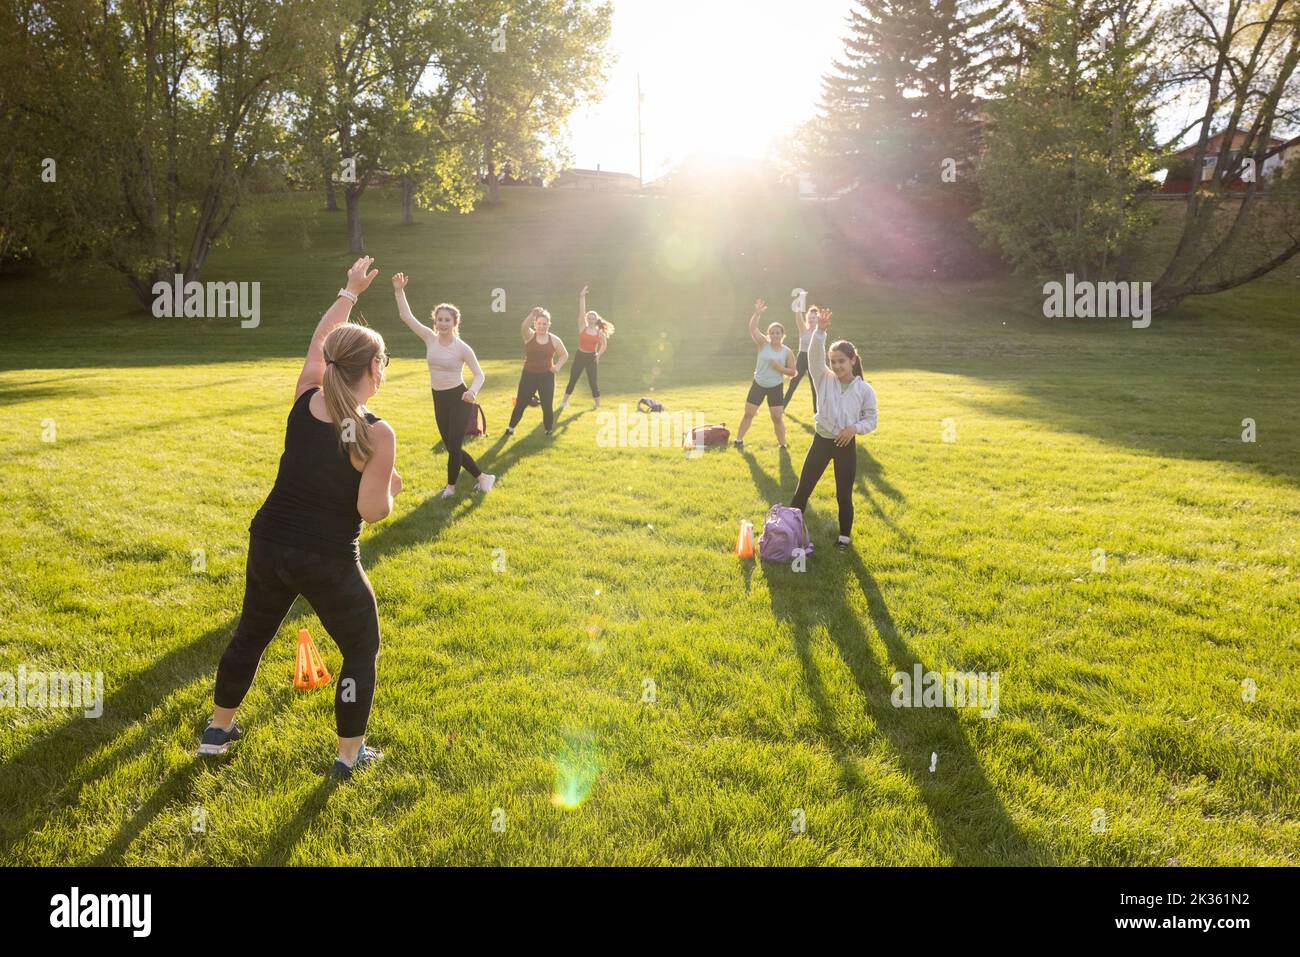 Fitness teacher conducting exercise in park Stock Photo